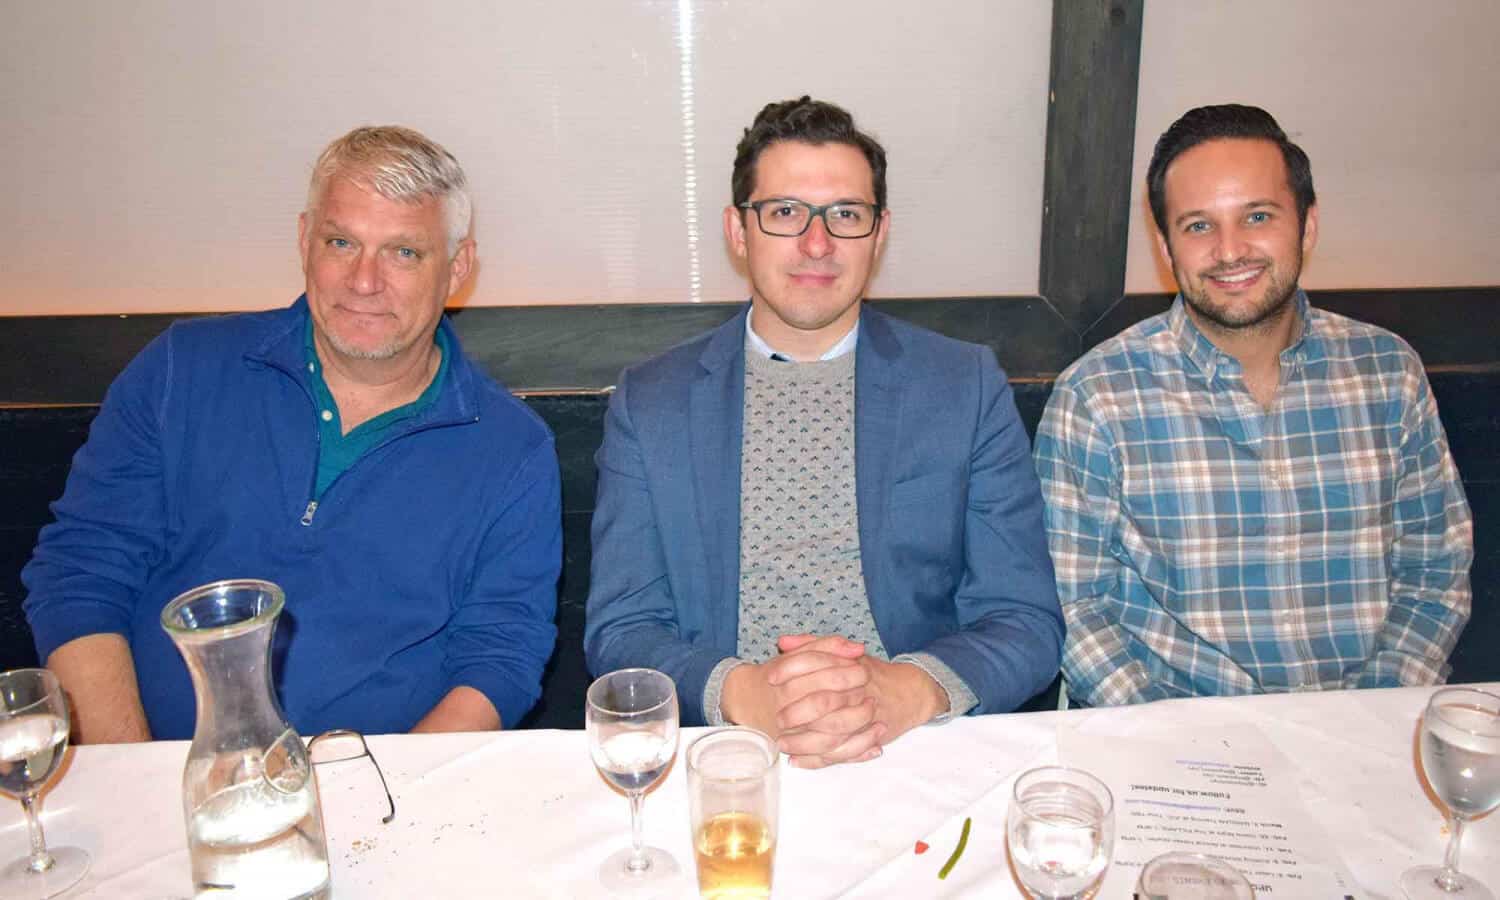 3 men smiling around a table at Mountainside Treatment Center Alumni Dinner and Roundtable in NYC